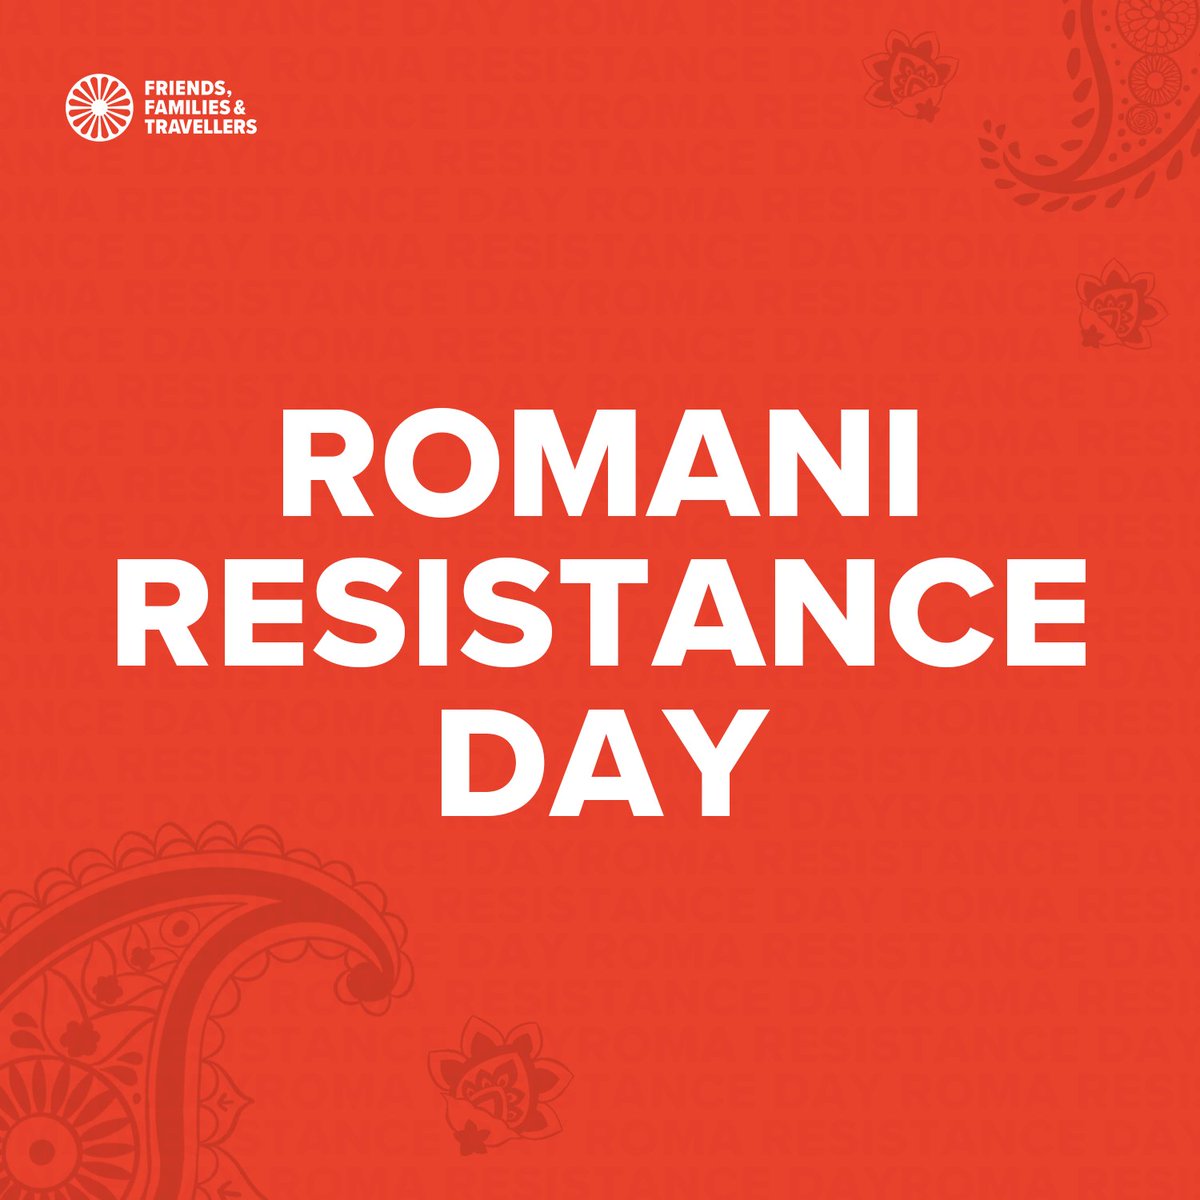 Today is Romani Resistance Day. On this day, 16th May 1944, Roma and Sinti people in Auschwitz-Birkenau resisted Nazi soldiers, delaying executions in the ‘Gypsy Camp’ for several months. We honour the bravery and strength of all the Roma and Sinti people.